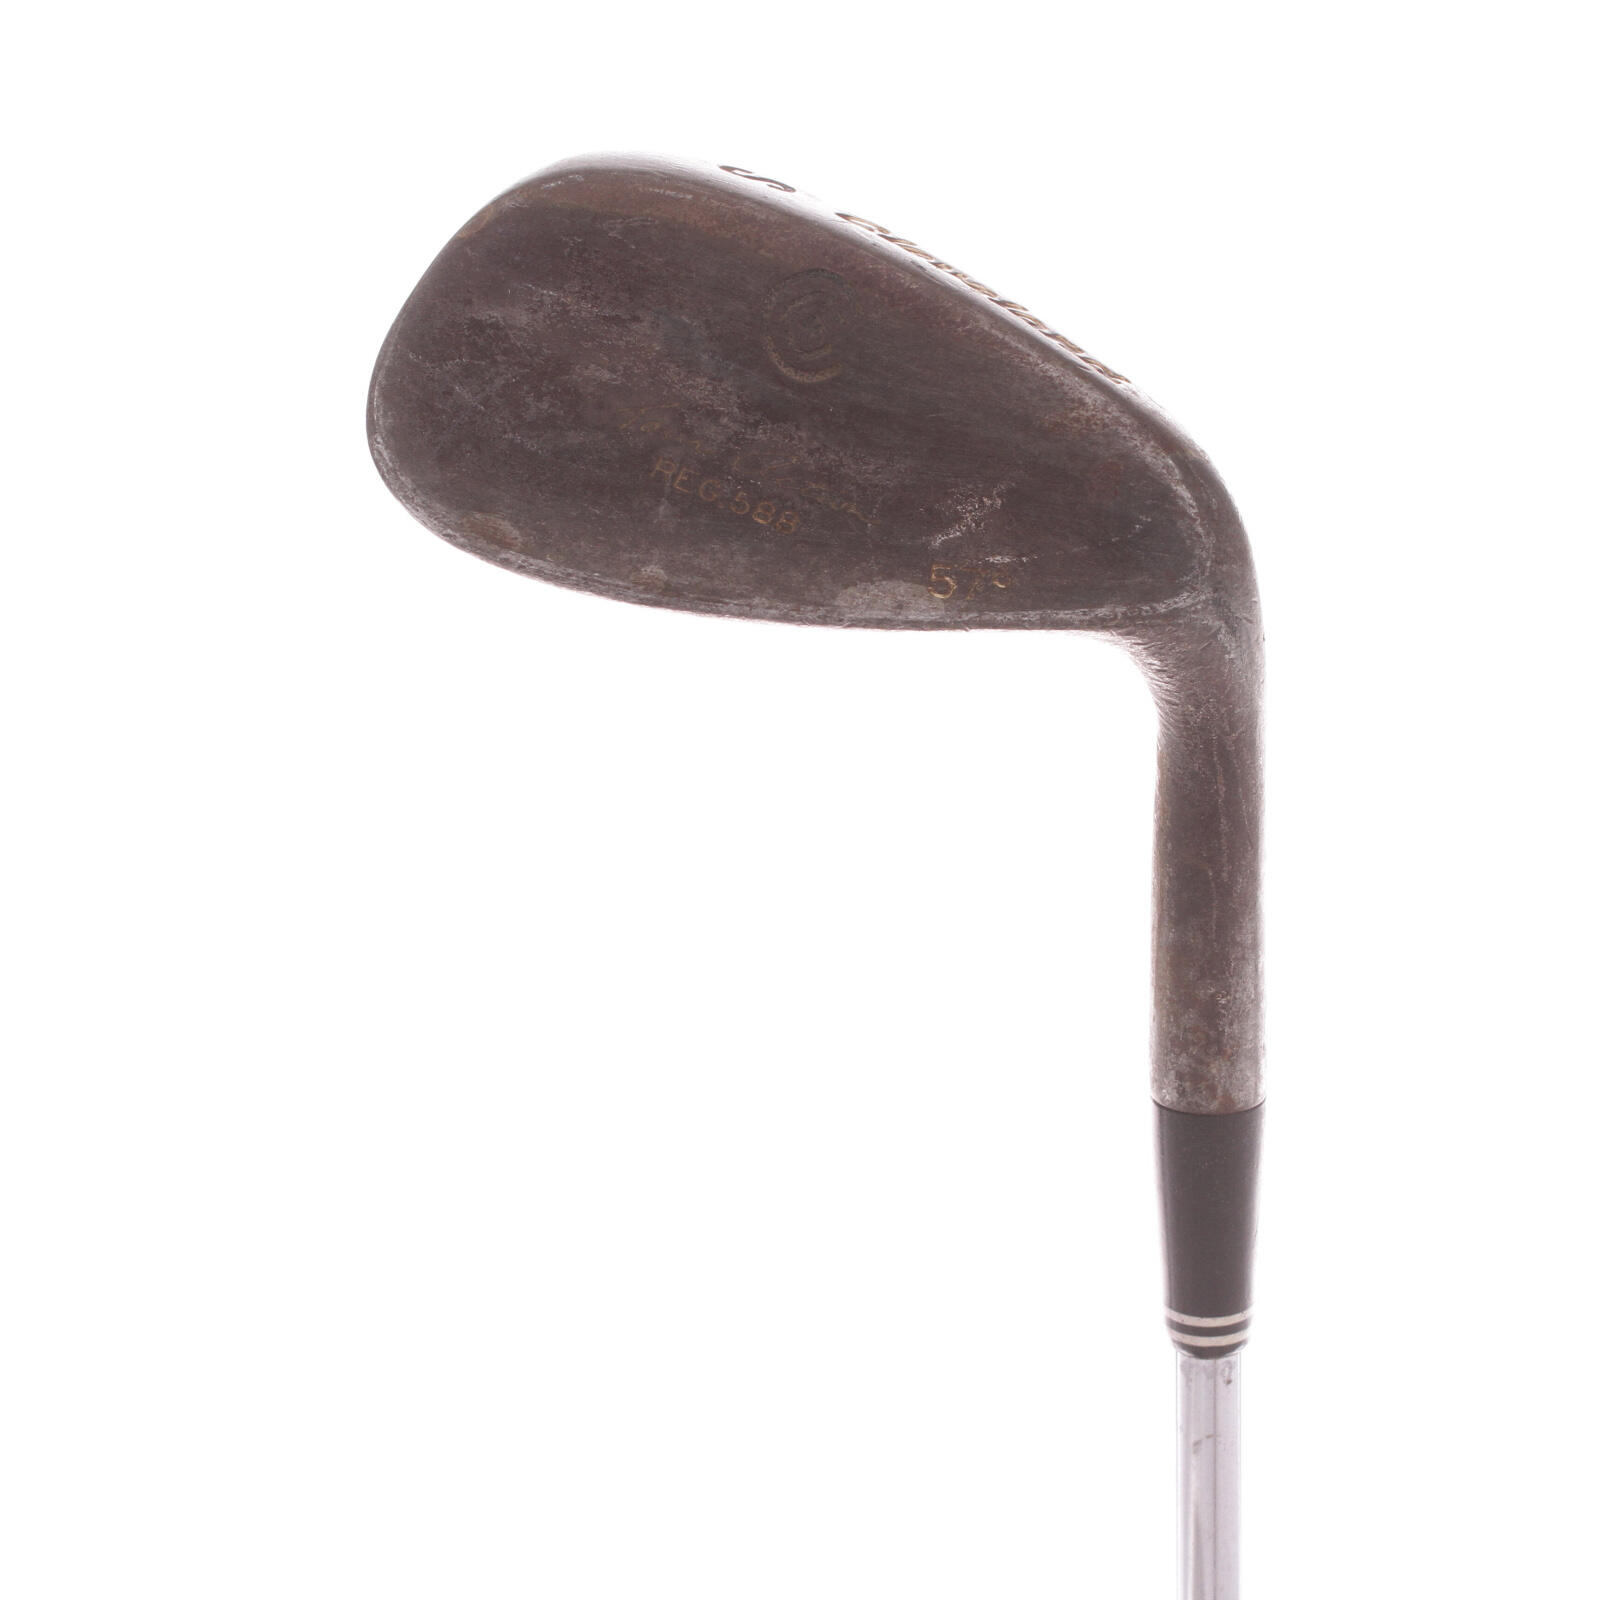 CLEVELAND GOLF USED - Sand Wedge Cleveland 588 Tour Action 57* Steel Shaft Right Hand - GRADE D